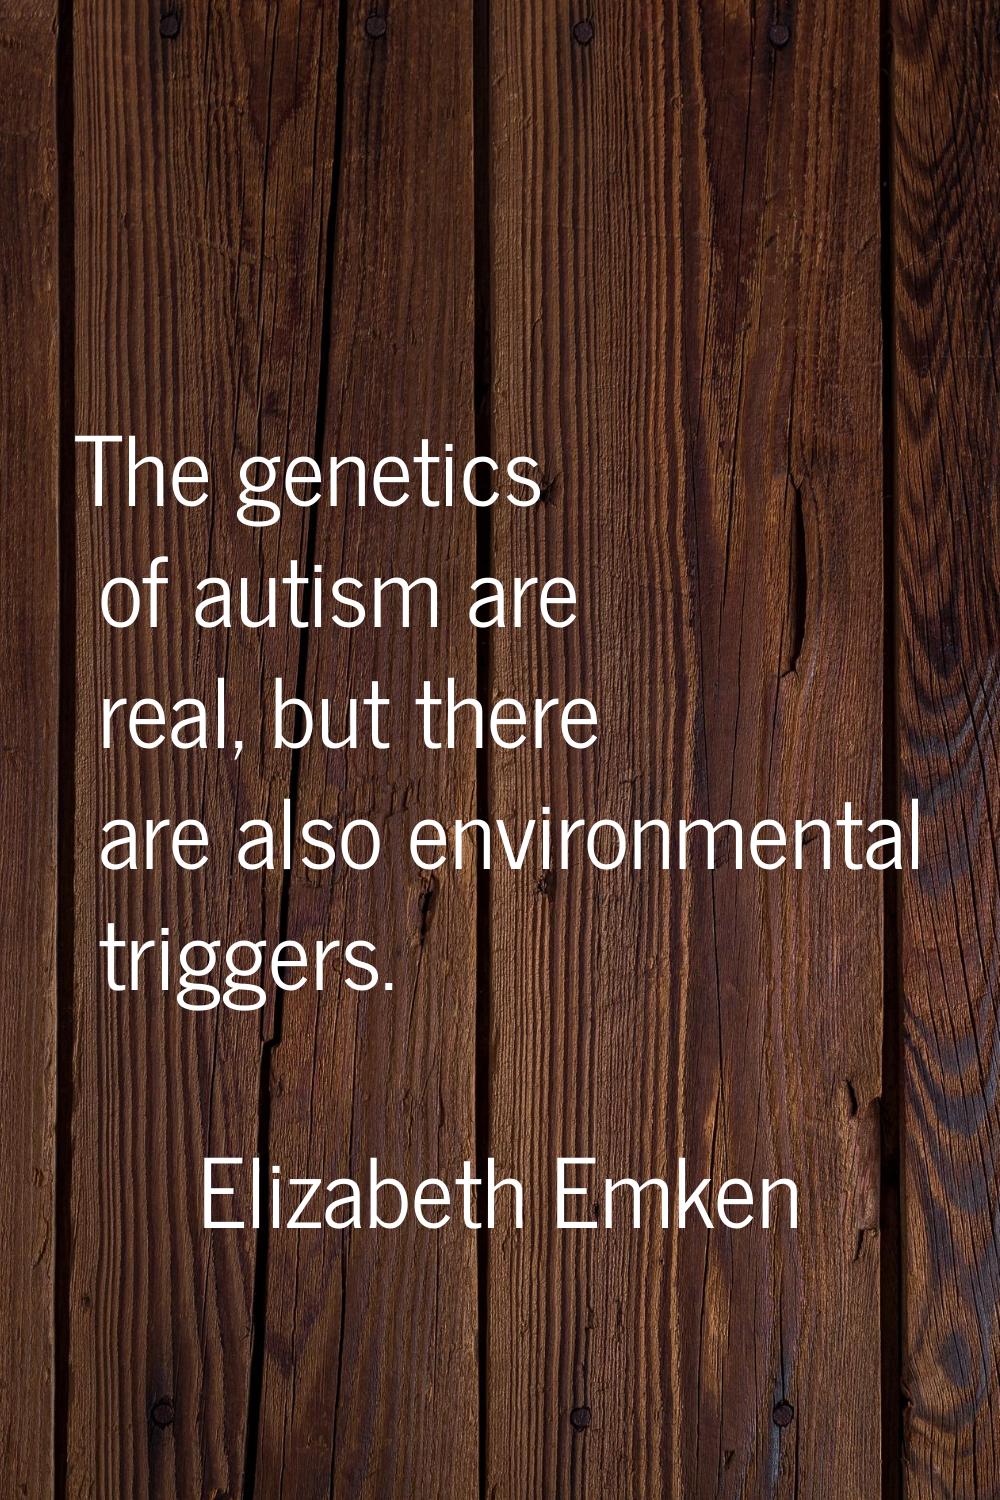 The genetics of autism are real, but there are also environmental triggers.